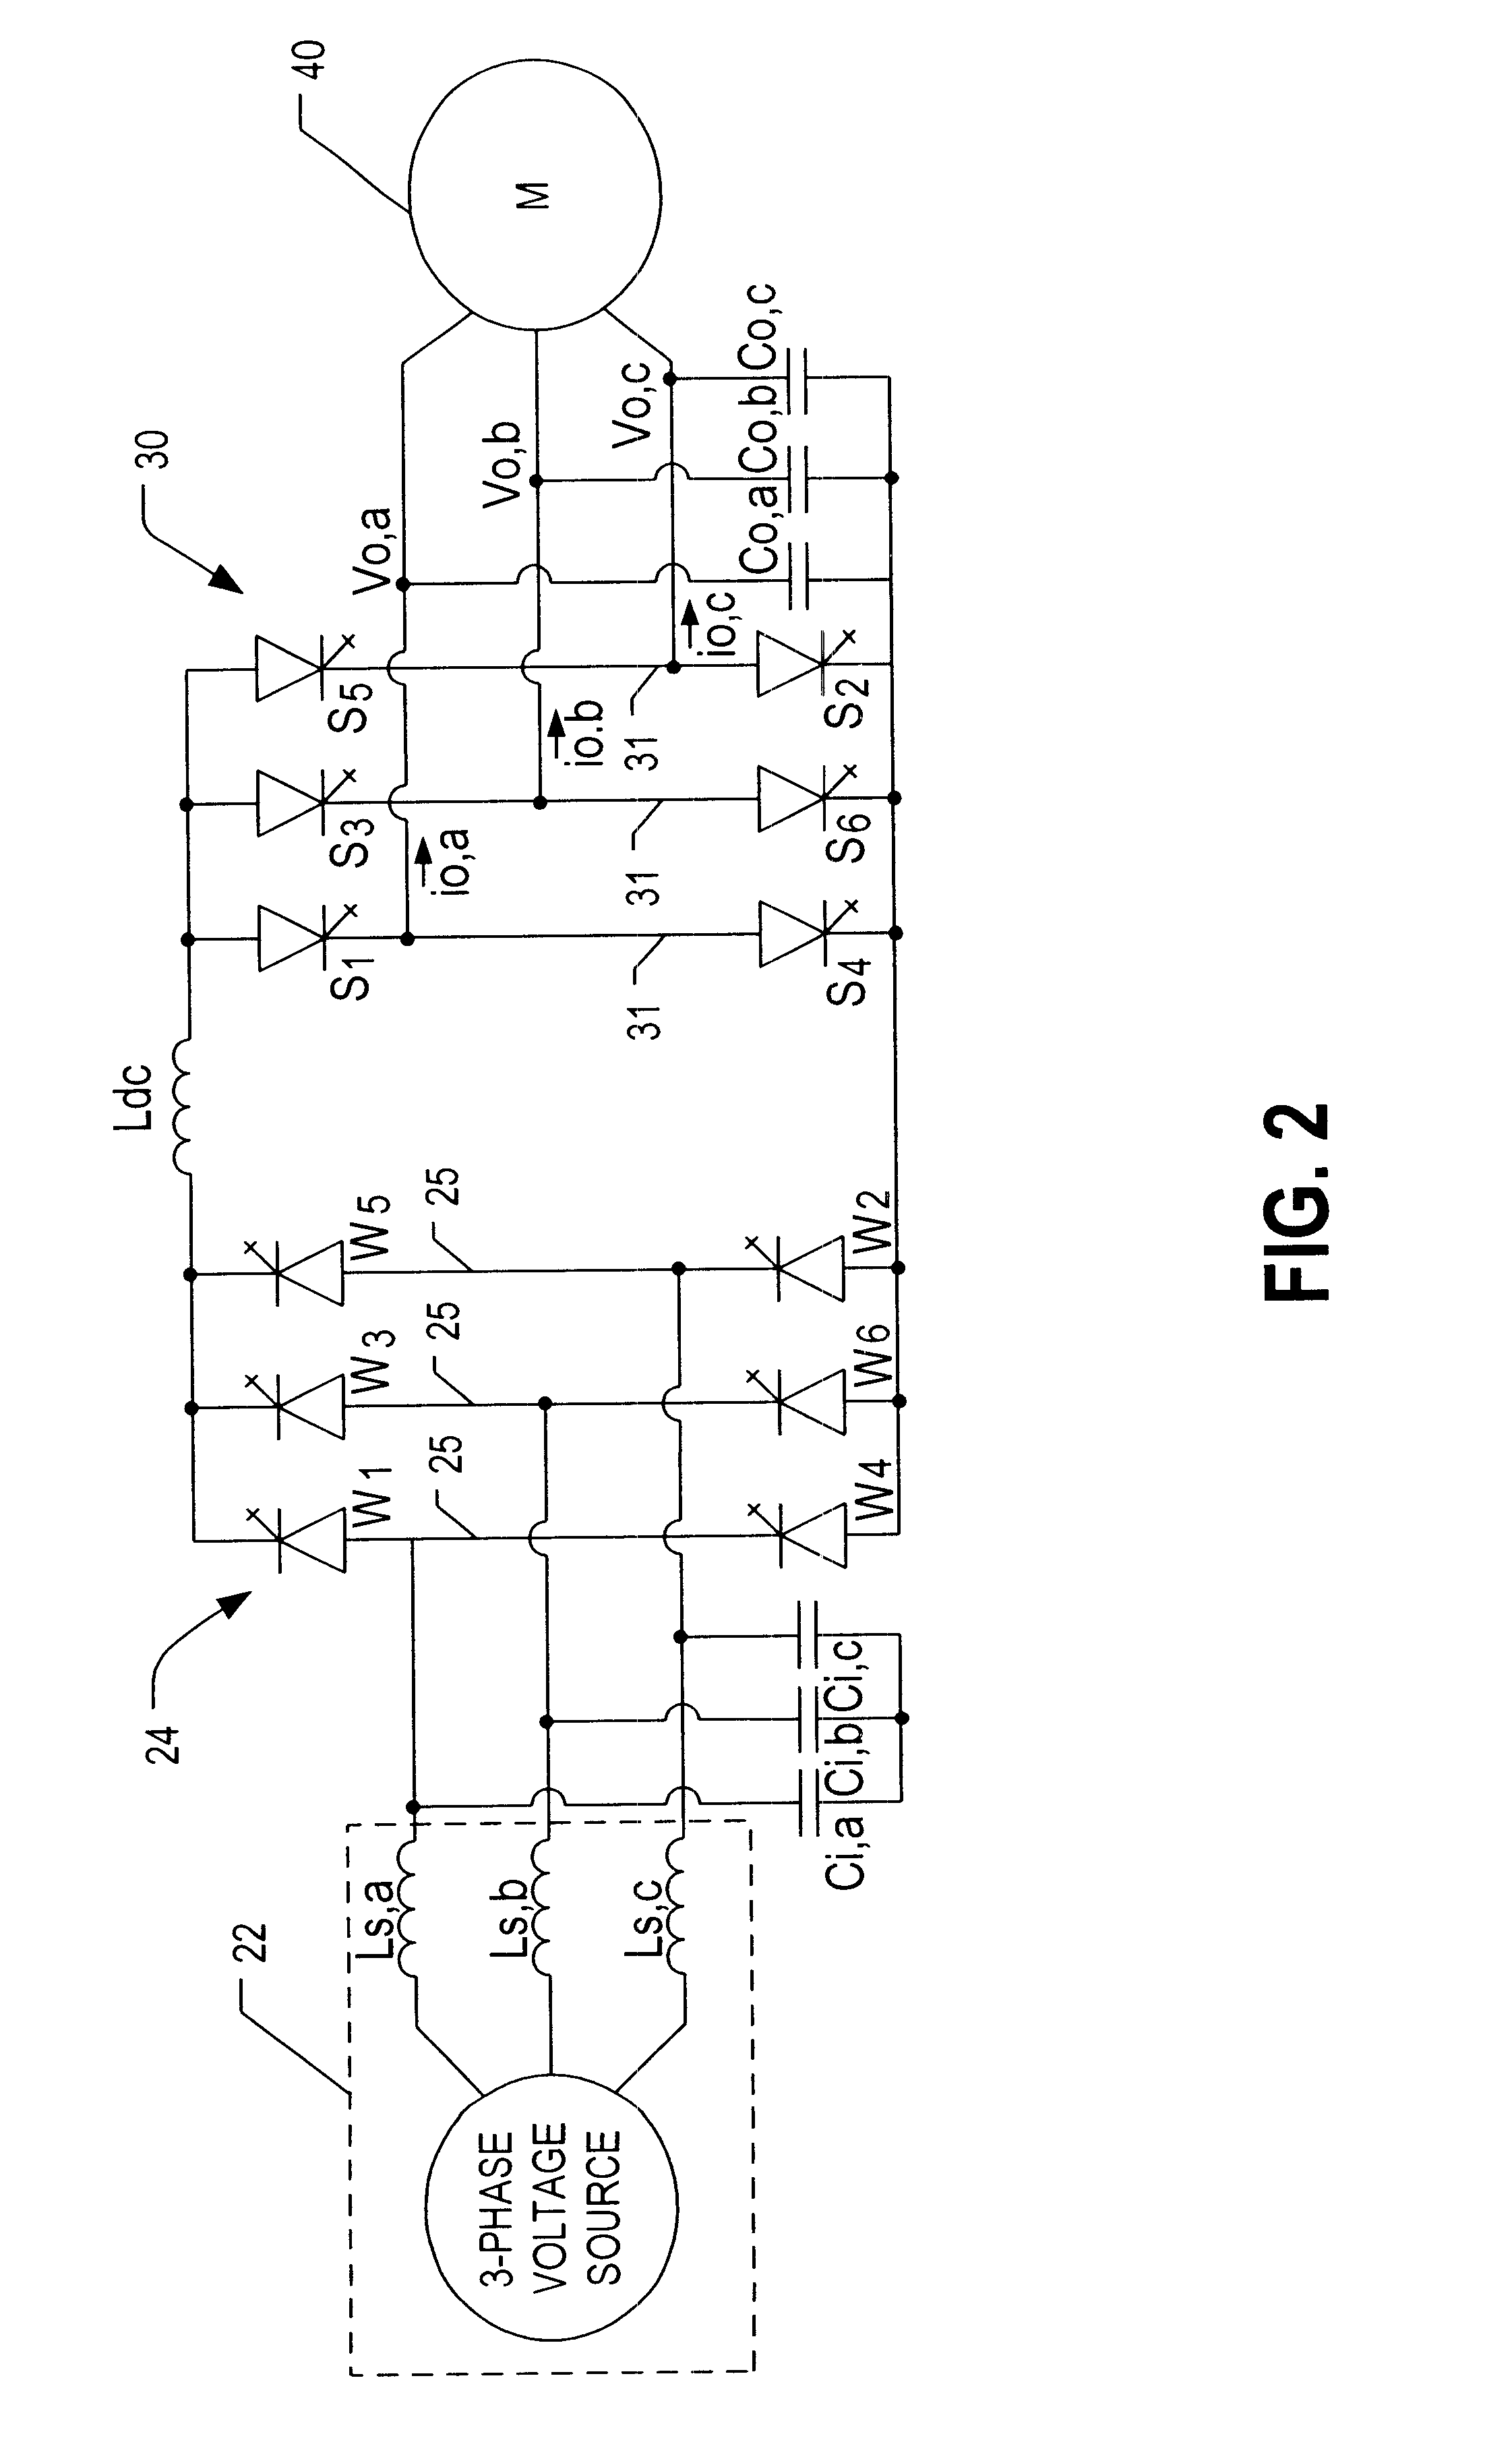 PWM rectifier having de-coupled power factor and output current control loops